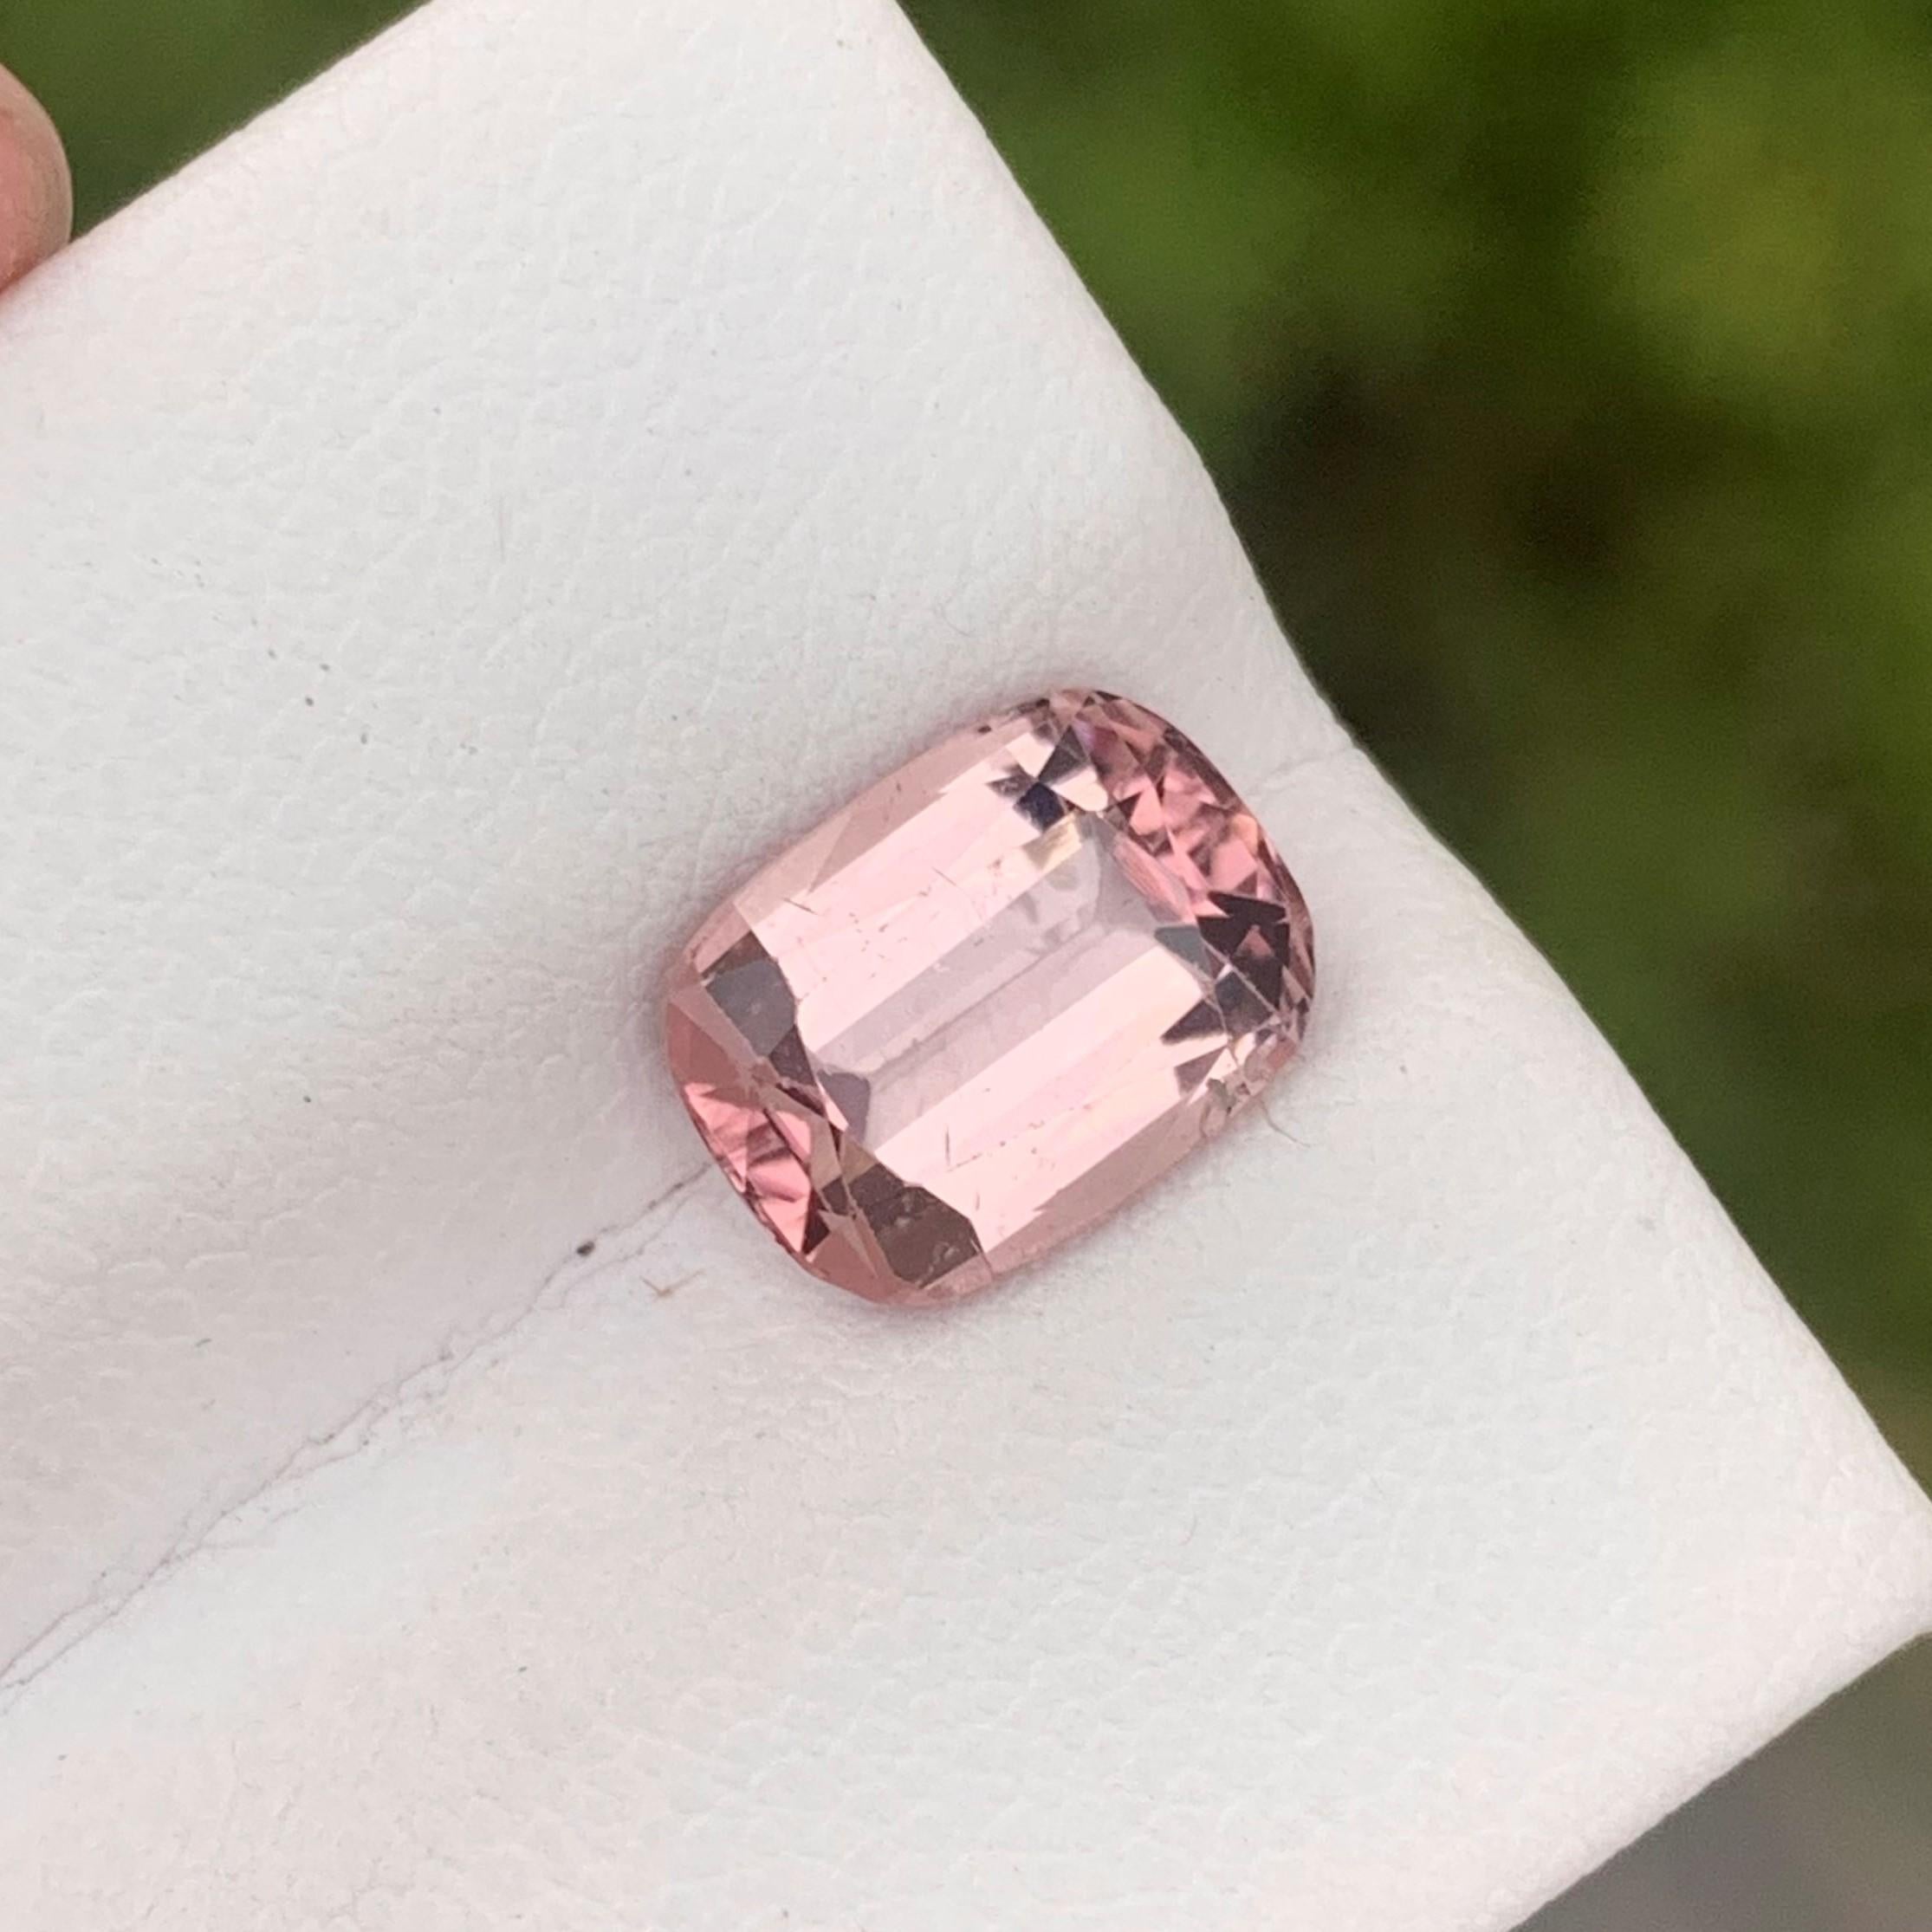 Gemstone Type : Tourmaline
Weight : 2.50 Carats
Dimensions : 9.8x7.3x4.9 Mm
Origin : Kunar Afghanistan
Clarity : Eye Clean
Shape: Cushion
Color: Peach
Certificate: On Demand
Basically, mint tourmalines are tourmalines with pastel hues of light green